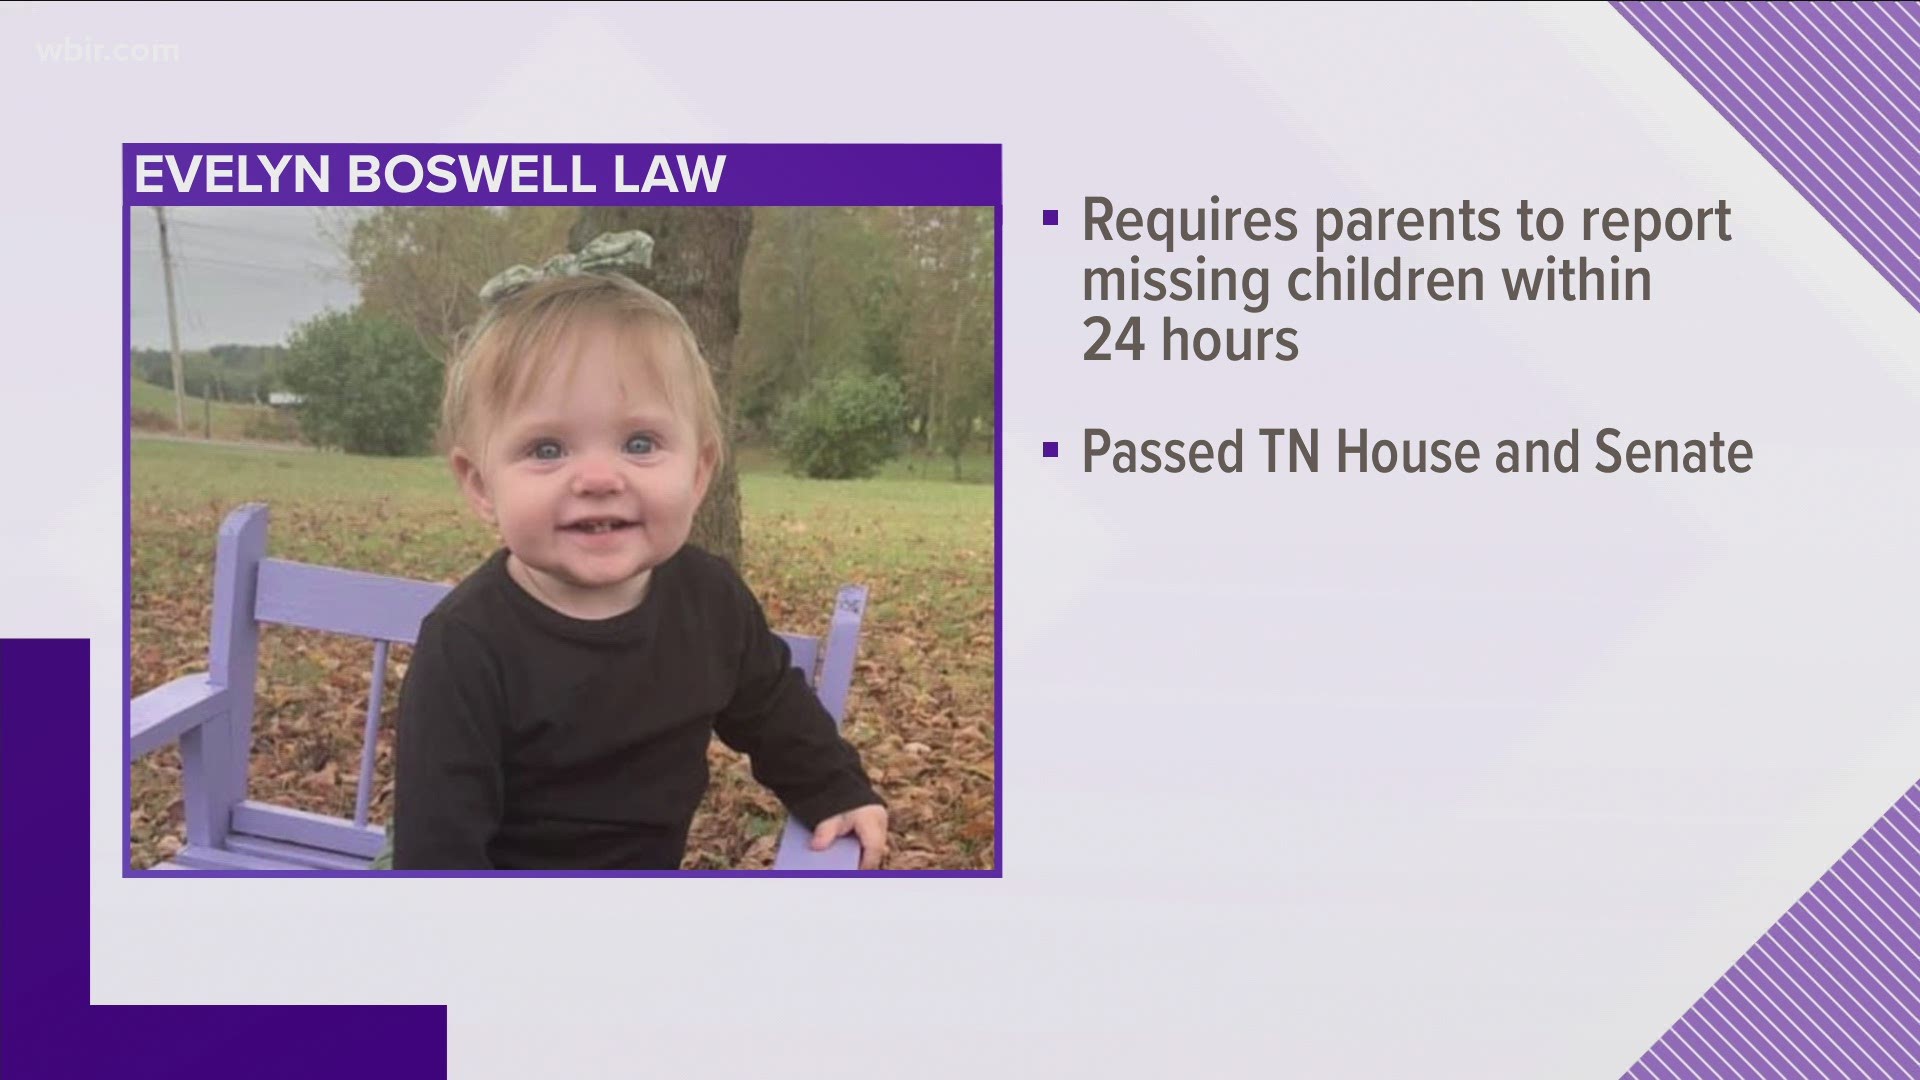 The bill would require parents to report their children as missing within 24 hours.